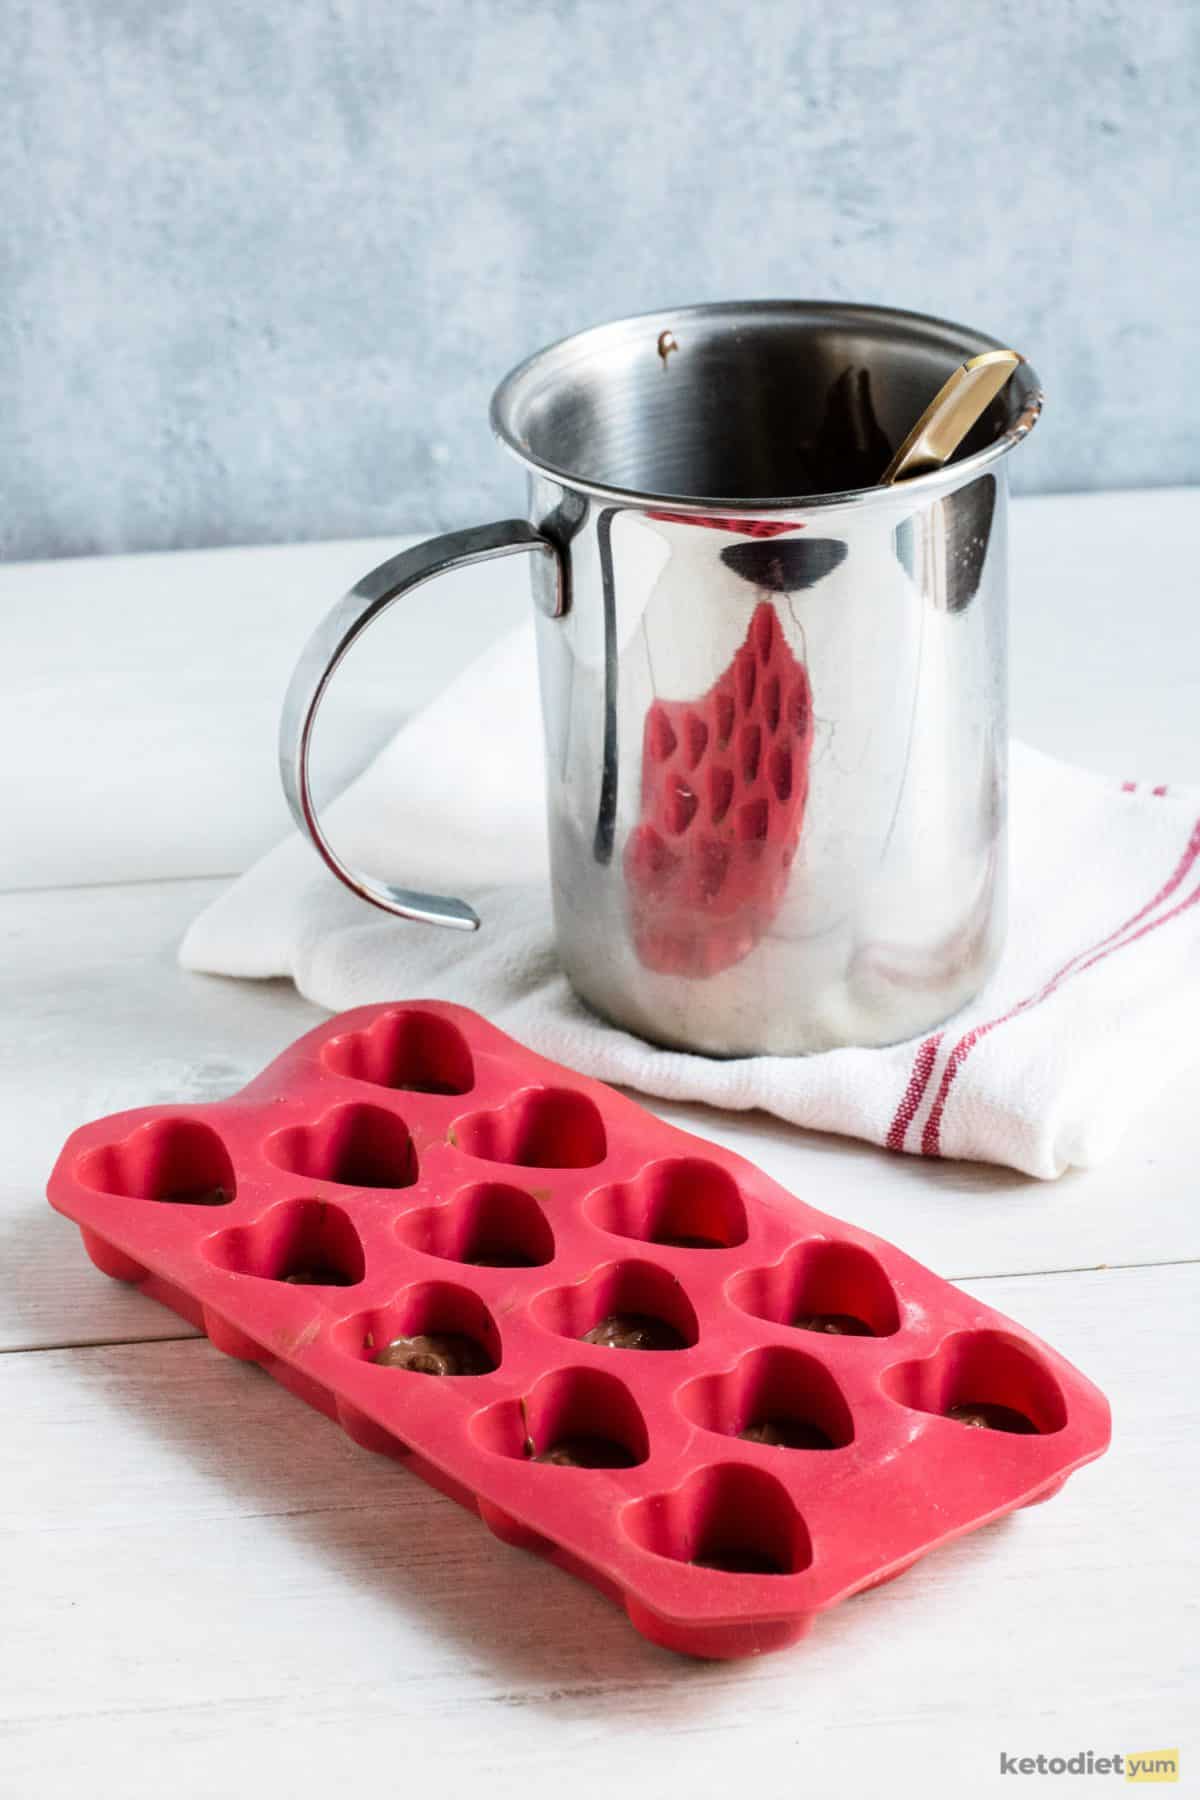 A double boiler and heart-shaped silicone tray